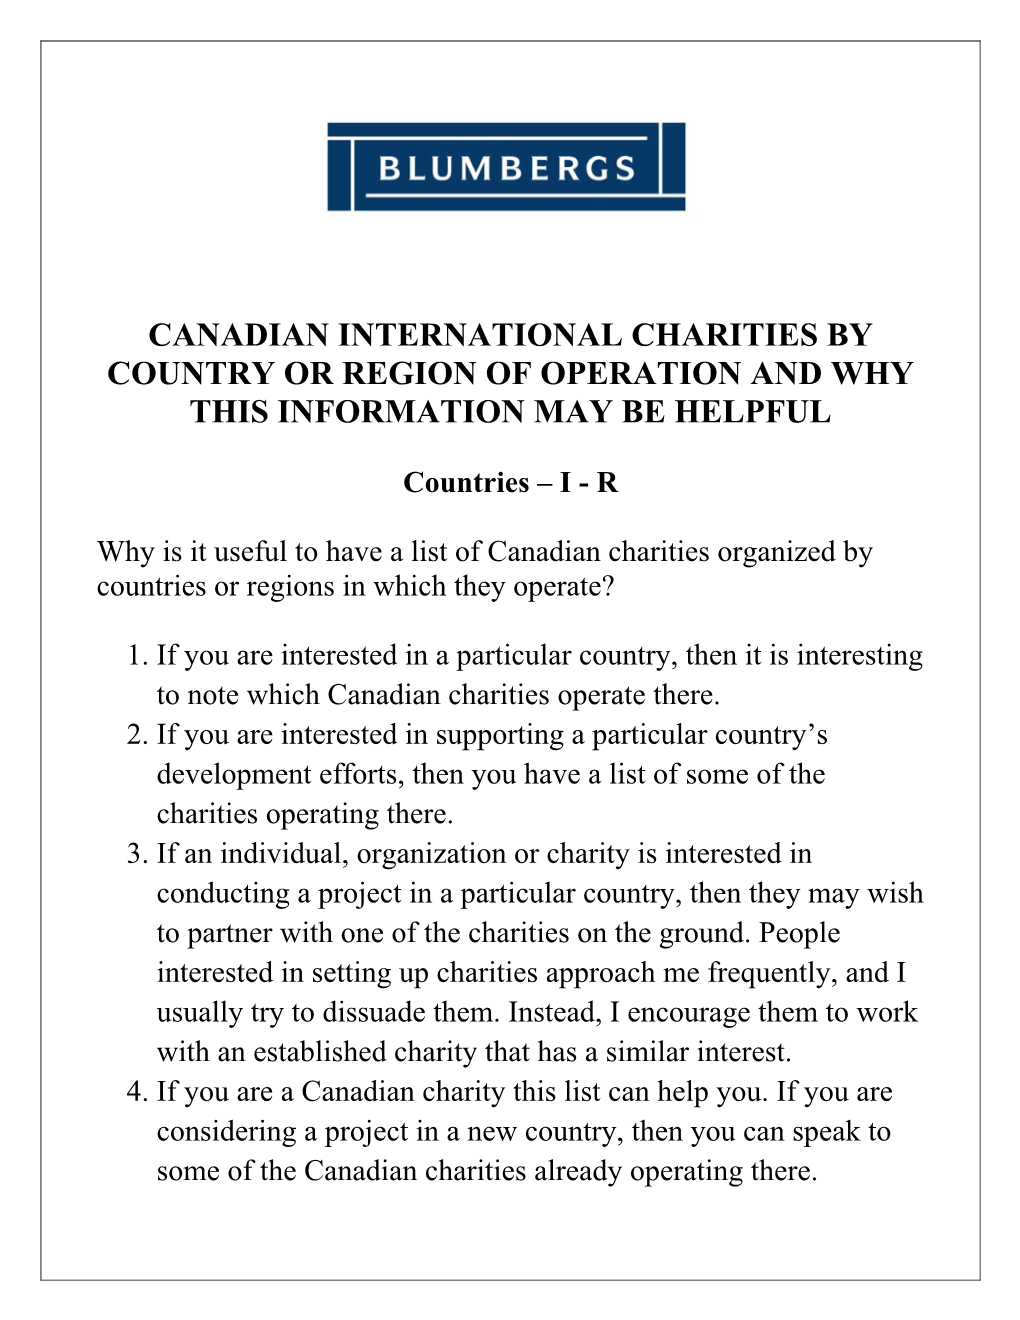 Canadian International Charities by Country Or Region of Operation and Why This Information May Be Helpful